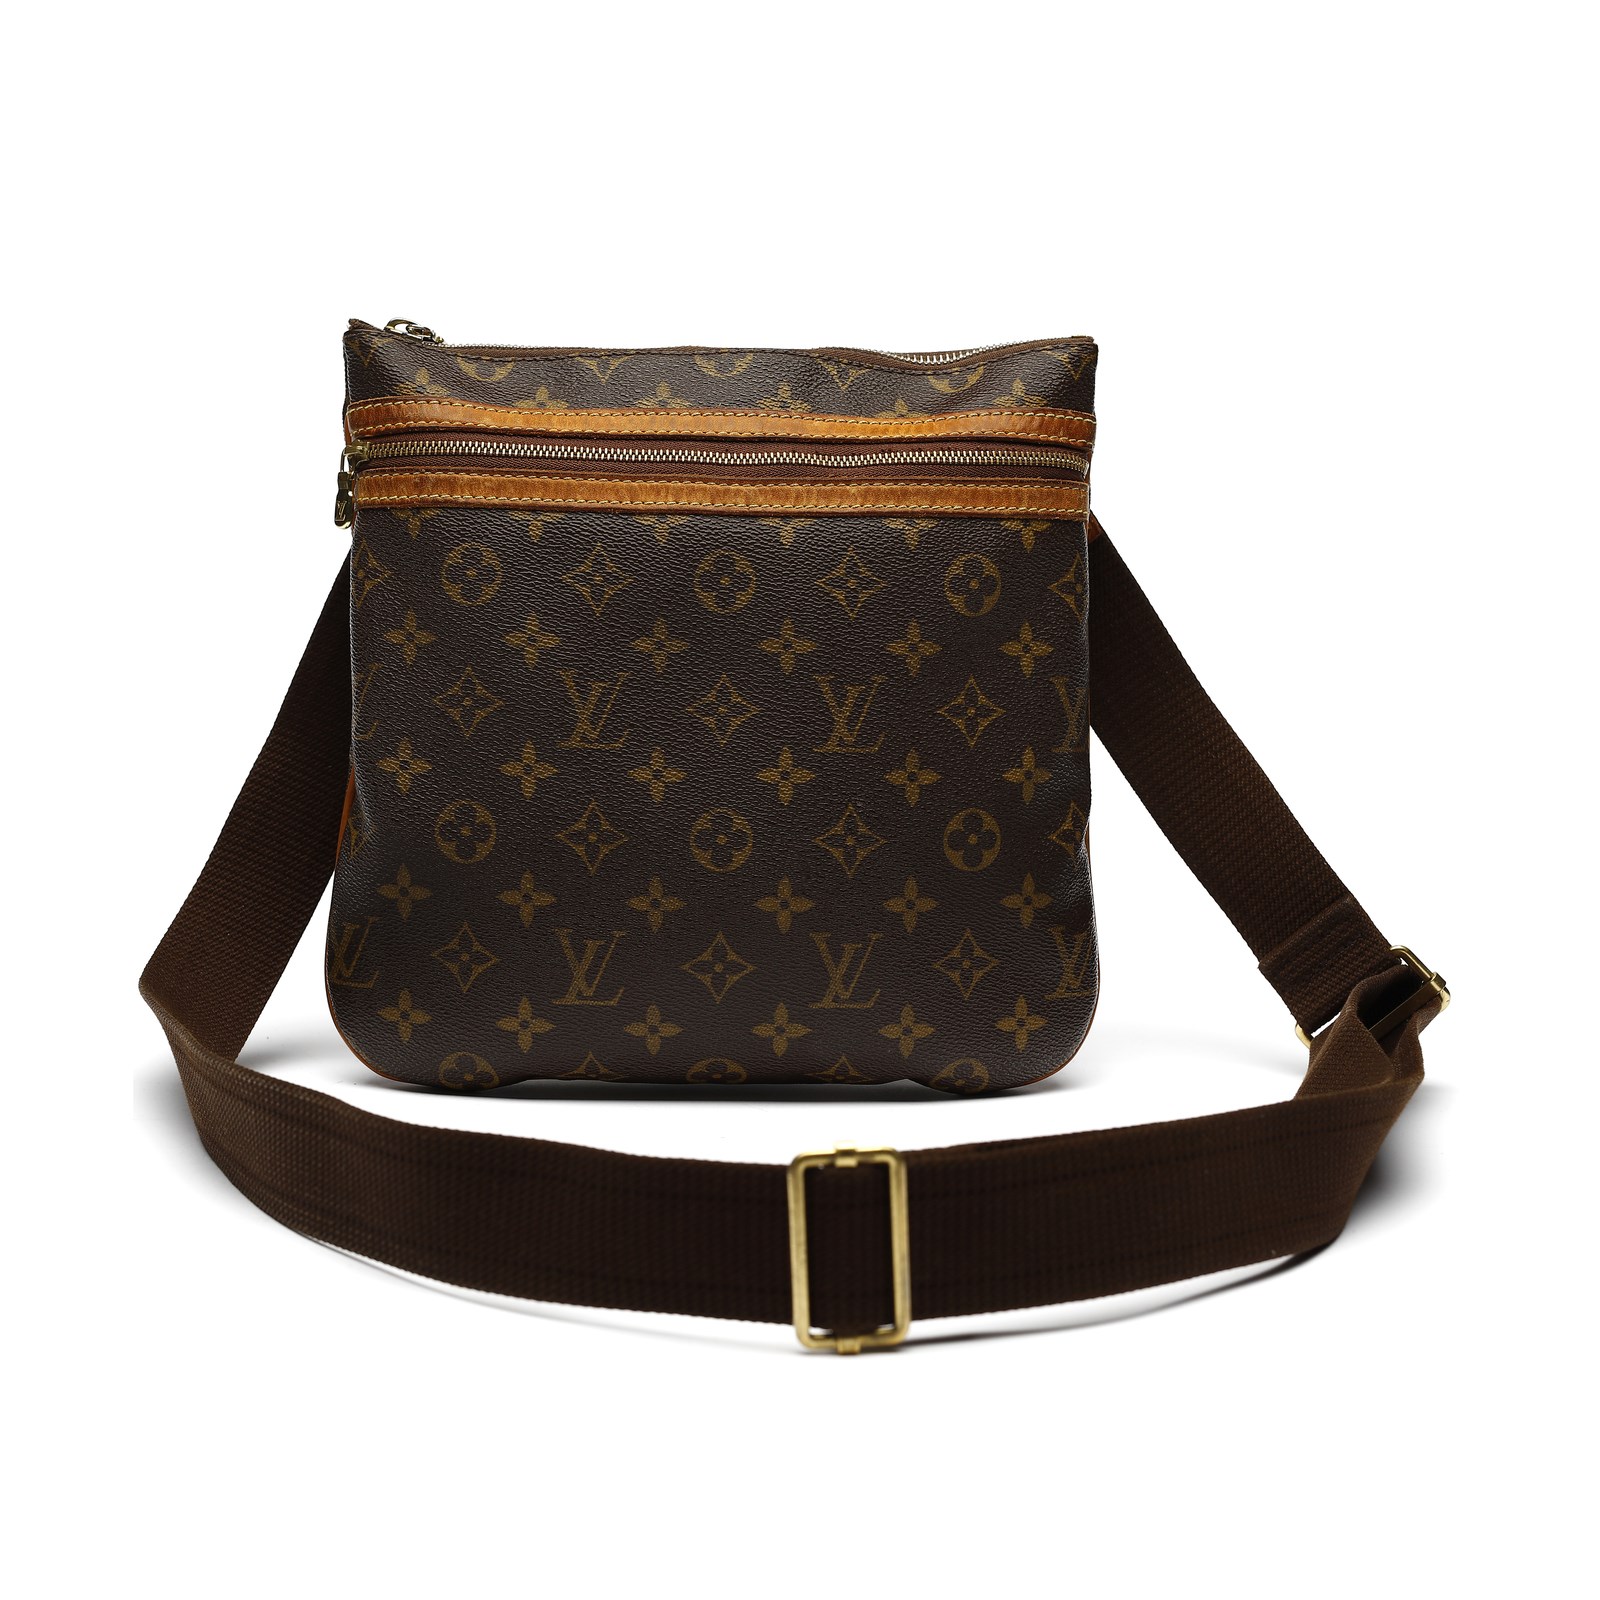 Sold at Auction: Louis Vuitton Monogram Bosphore Backpack